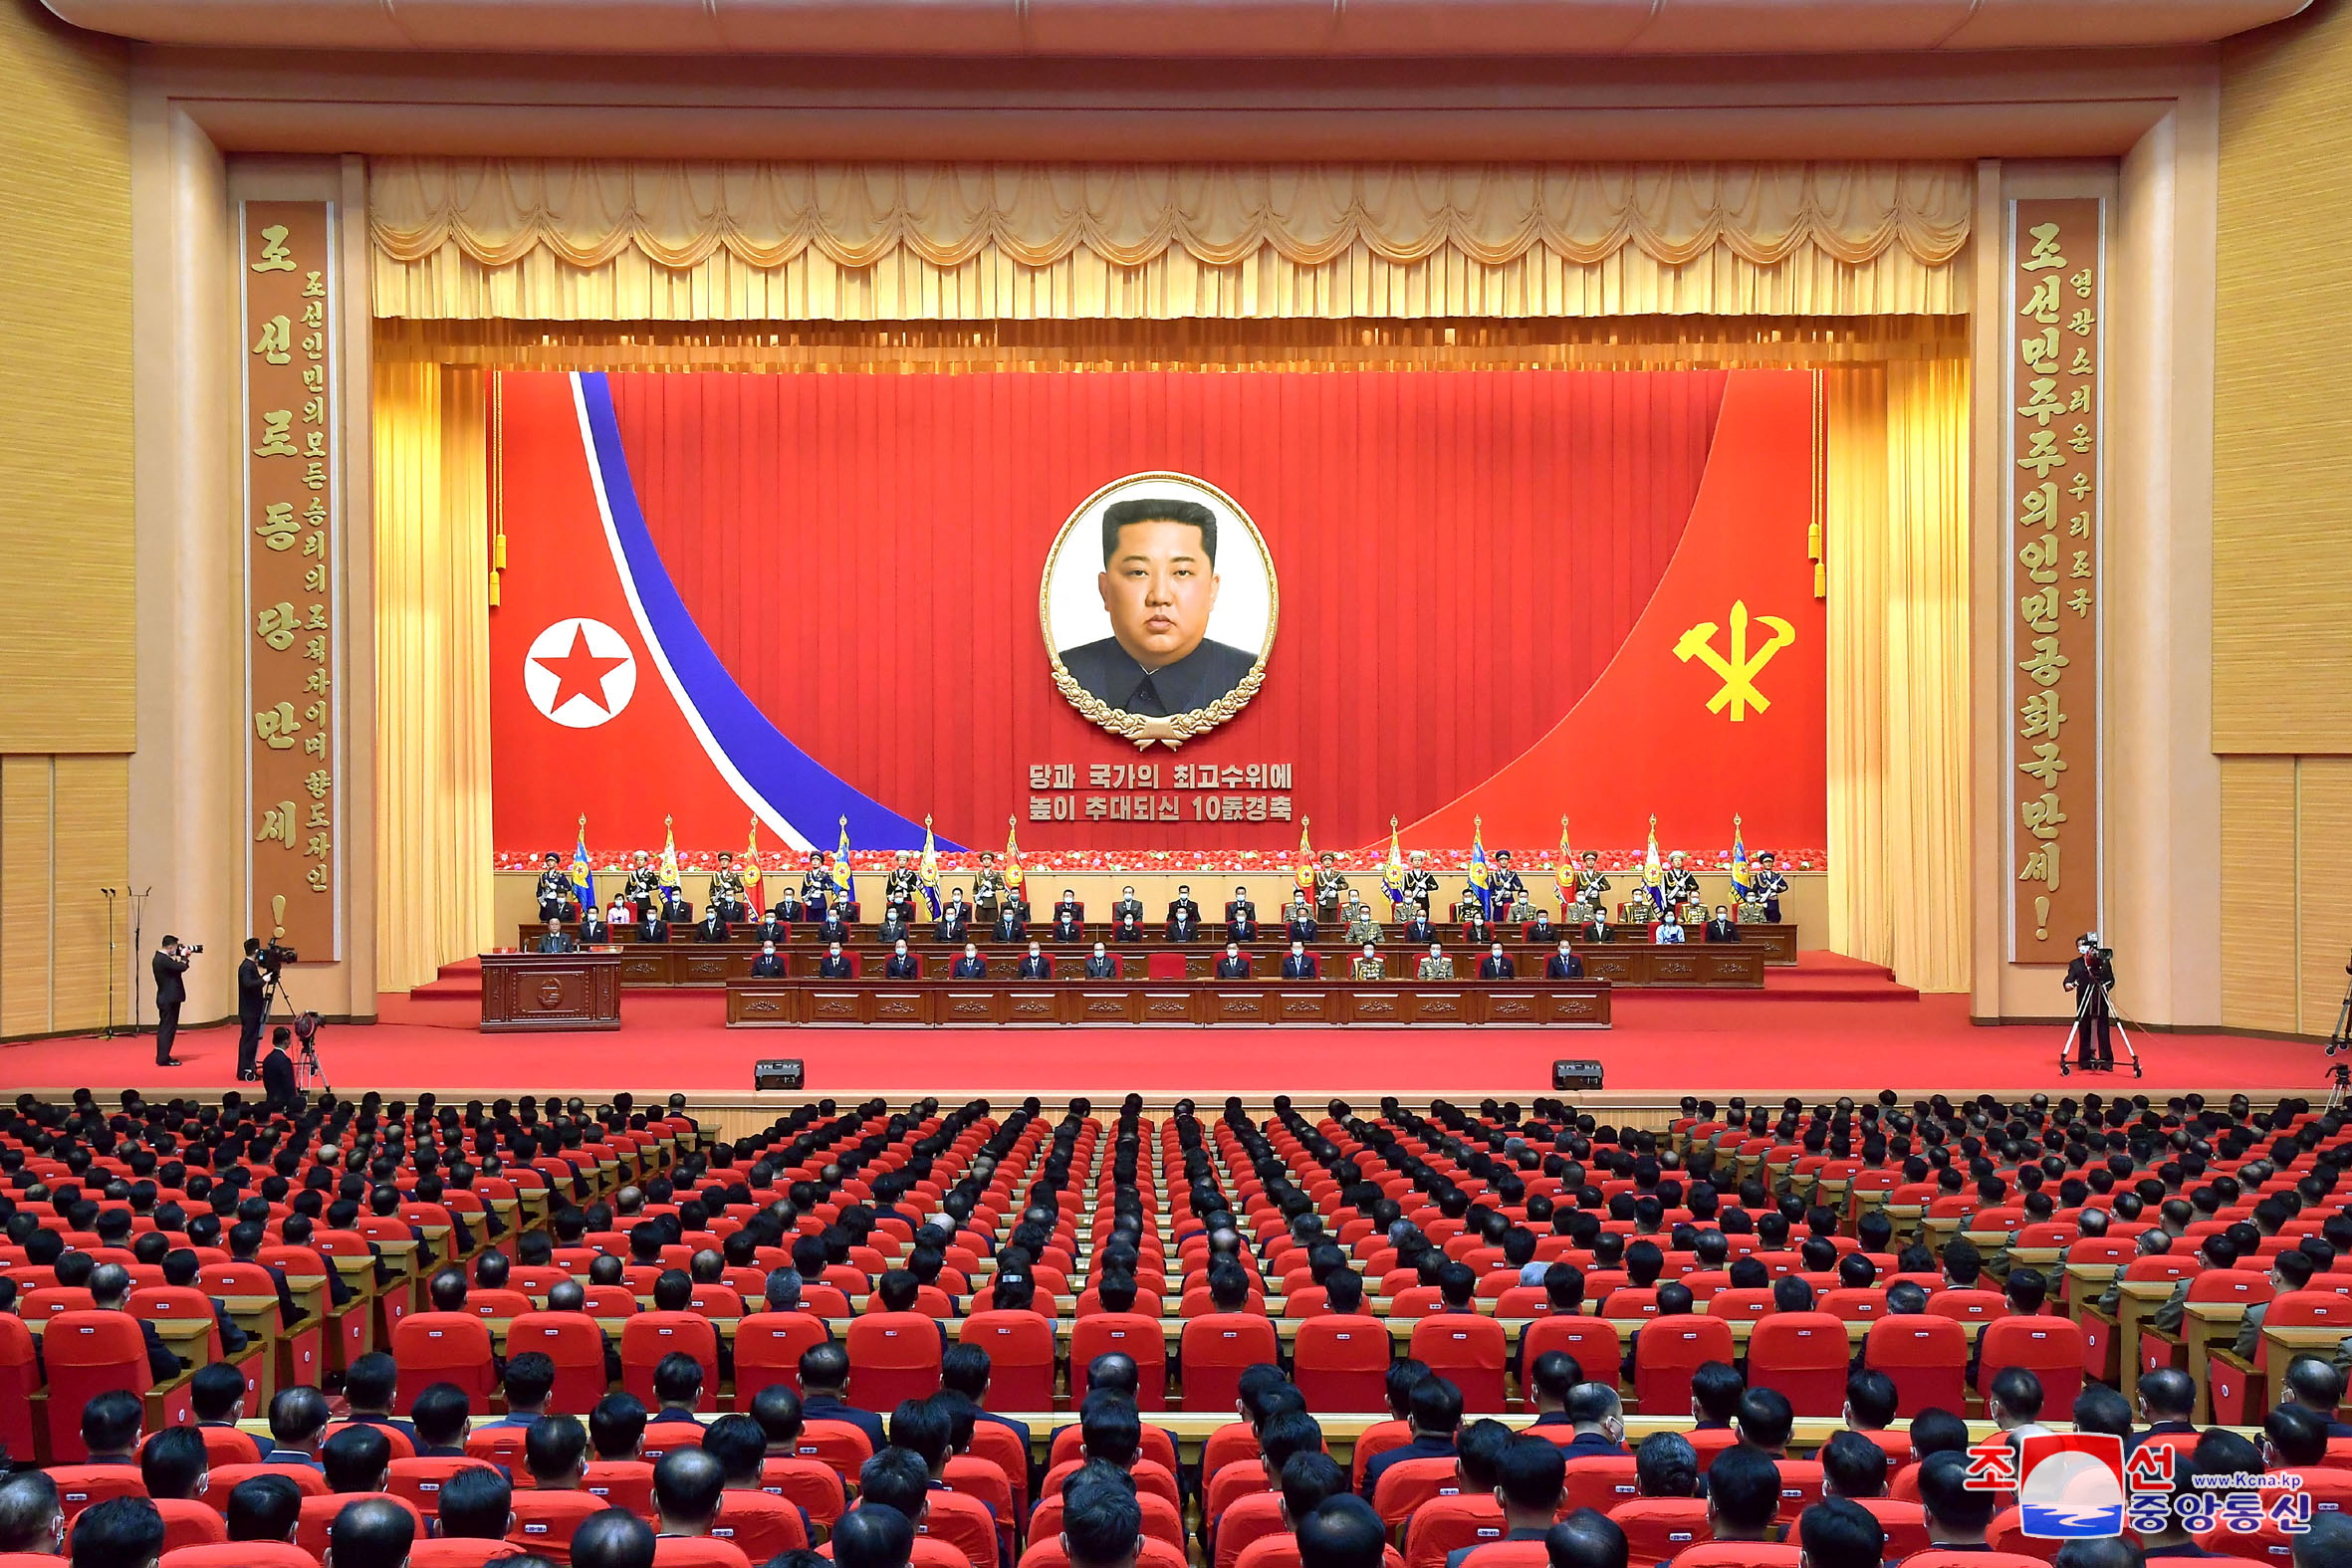 A portrait of North Korea's leader Kim Jong Un is displayed at a national meeting to commemorate Kim's 10-year anniversary as head of the country's ruling Workers' Party of Korea (WPK) in Pyongyang